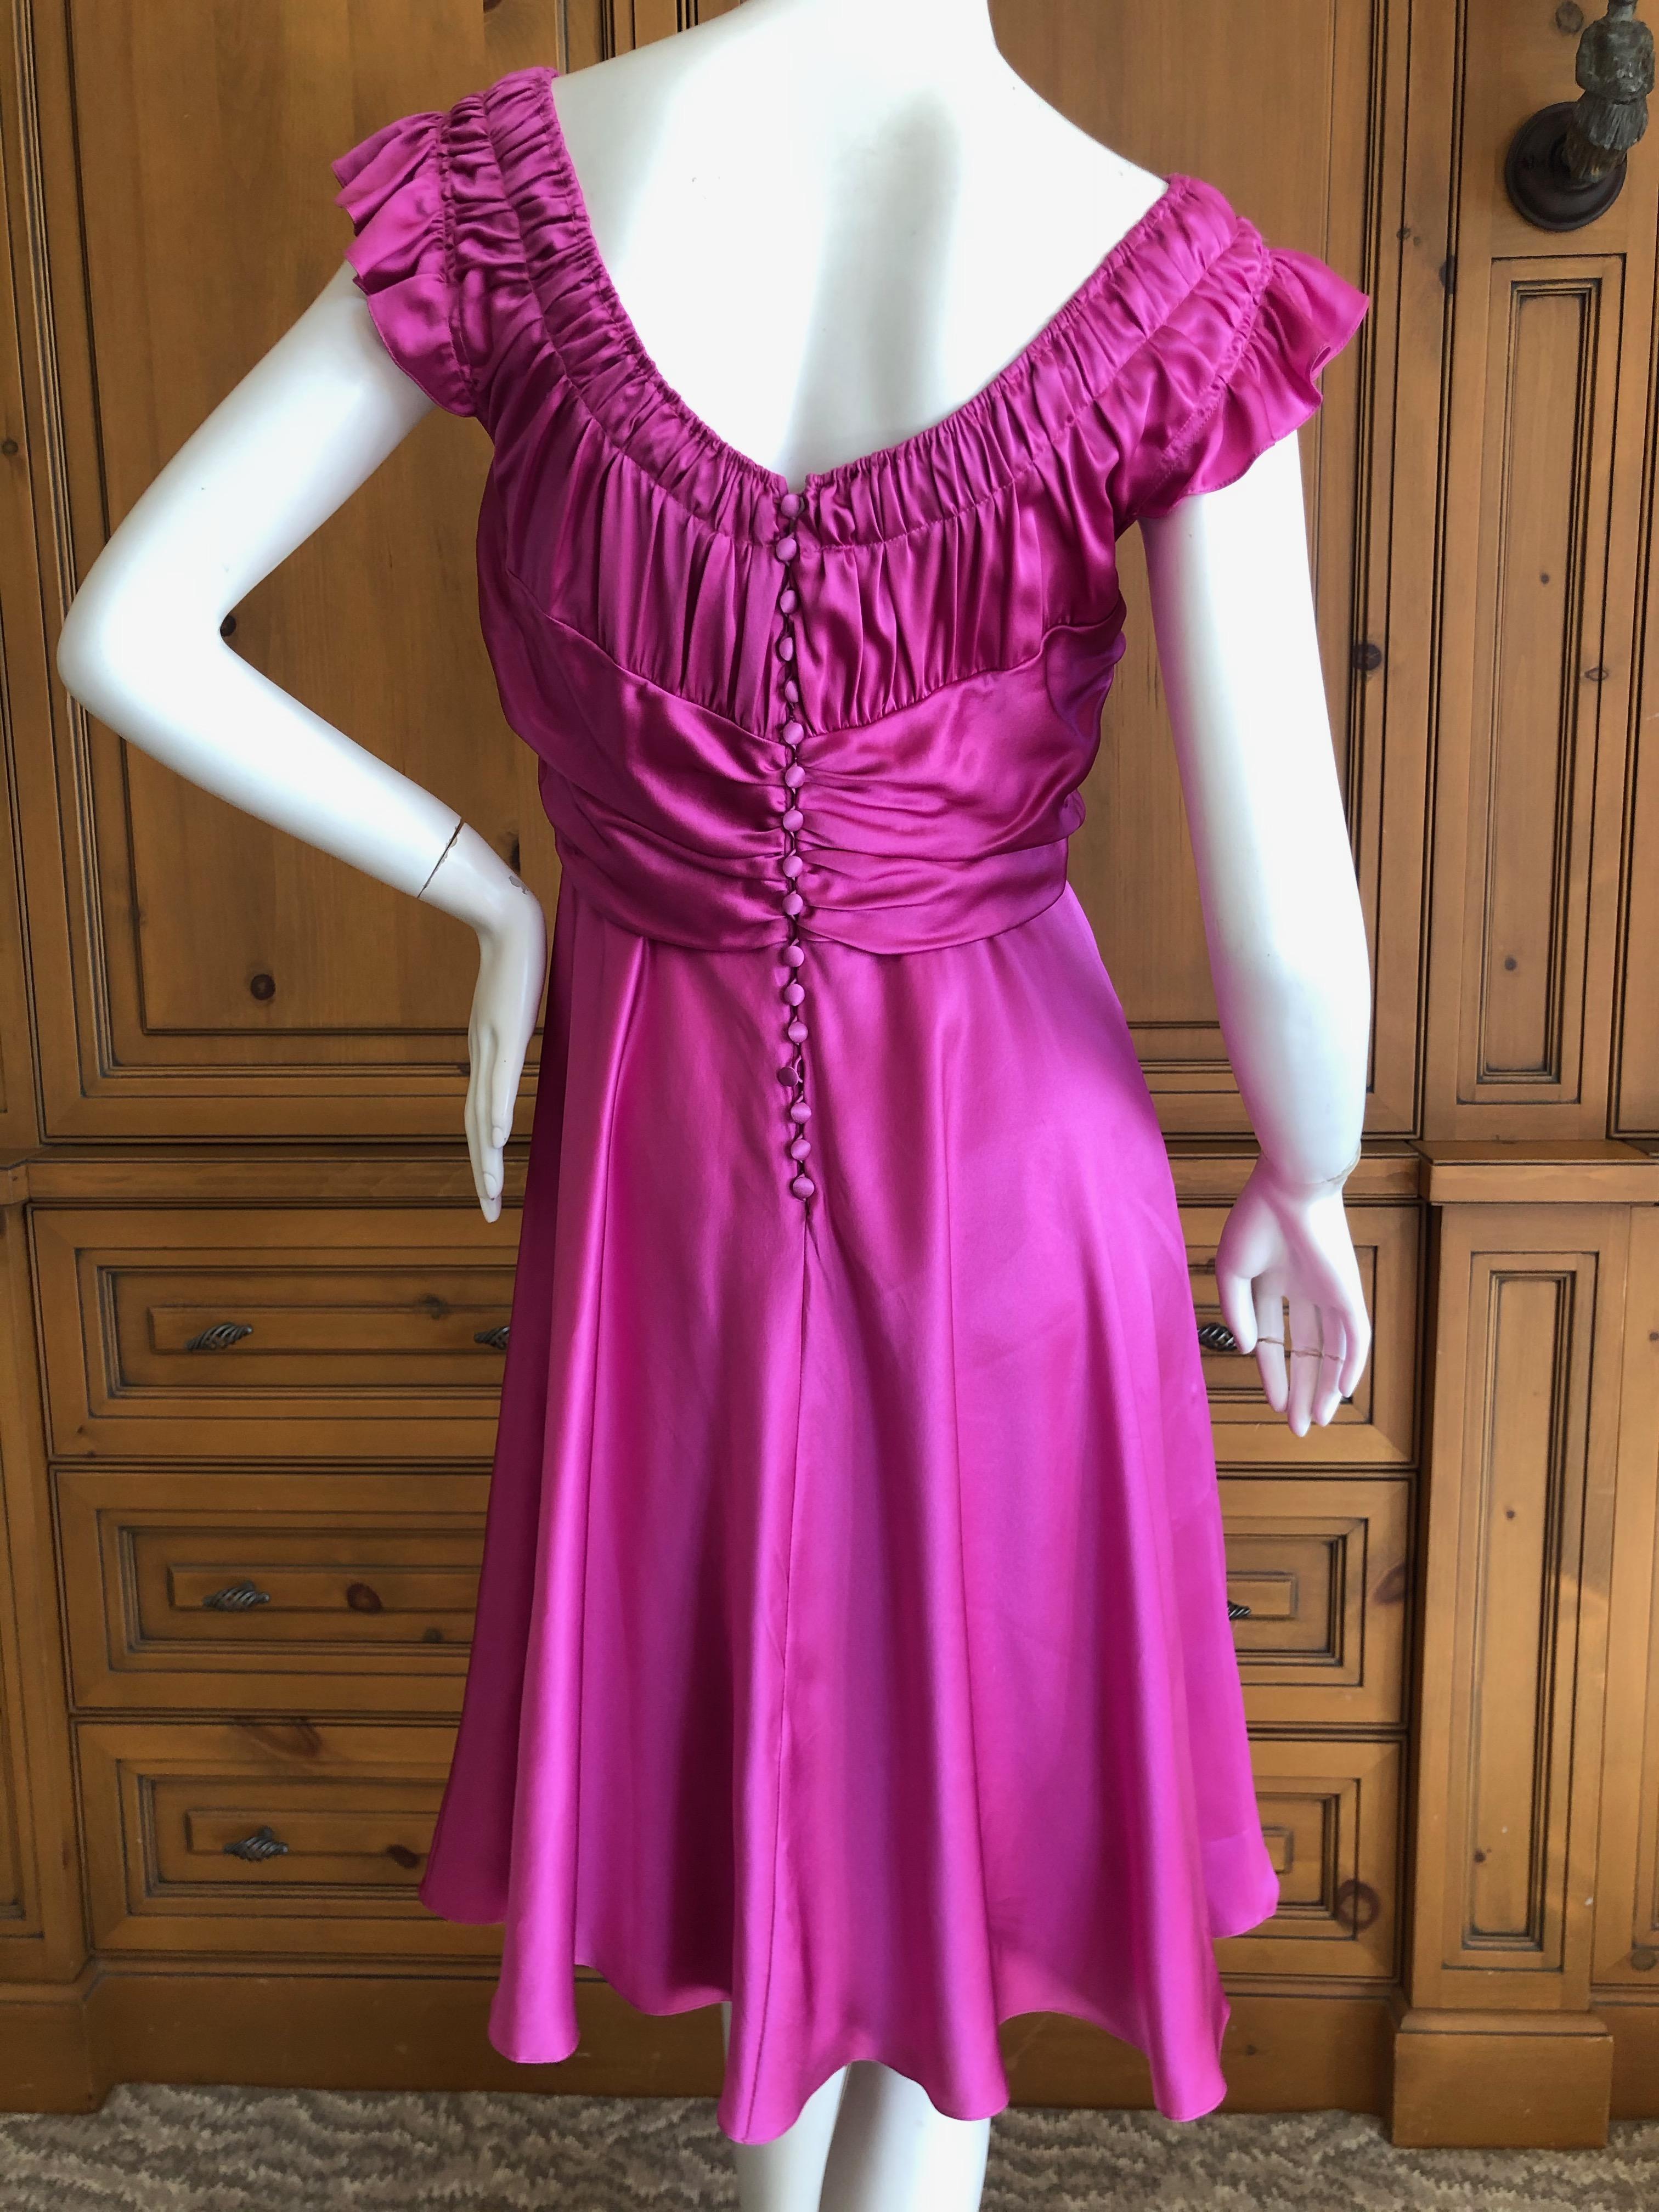 Women's   John Galliano Vintage Pink Low Cut Dress with Gathered Details For Sale